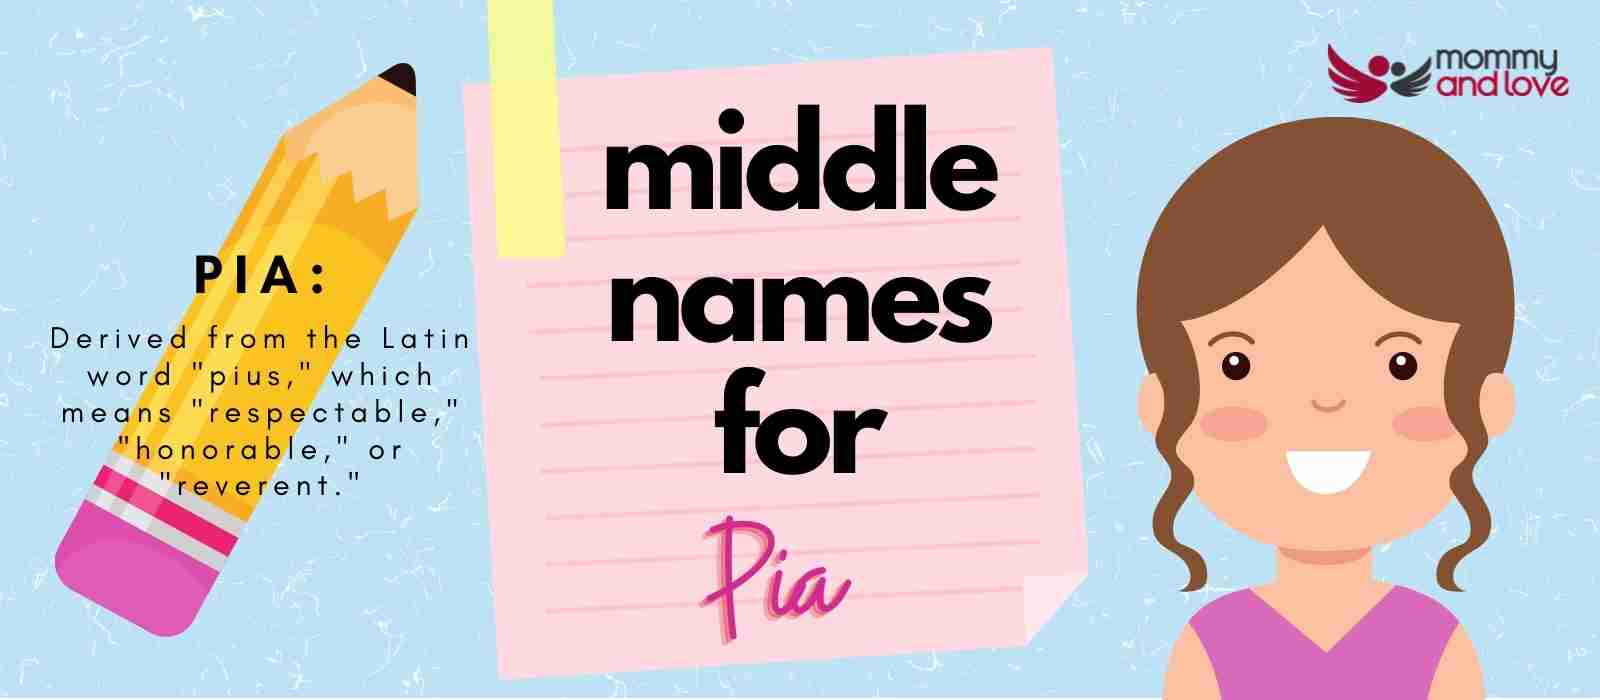 Middle Names for Pia